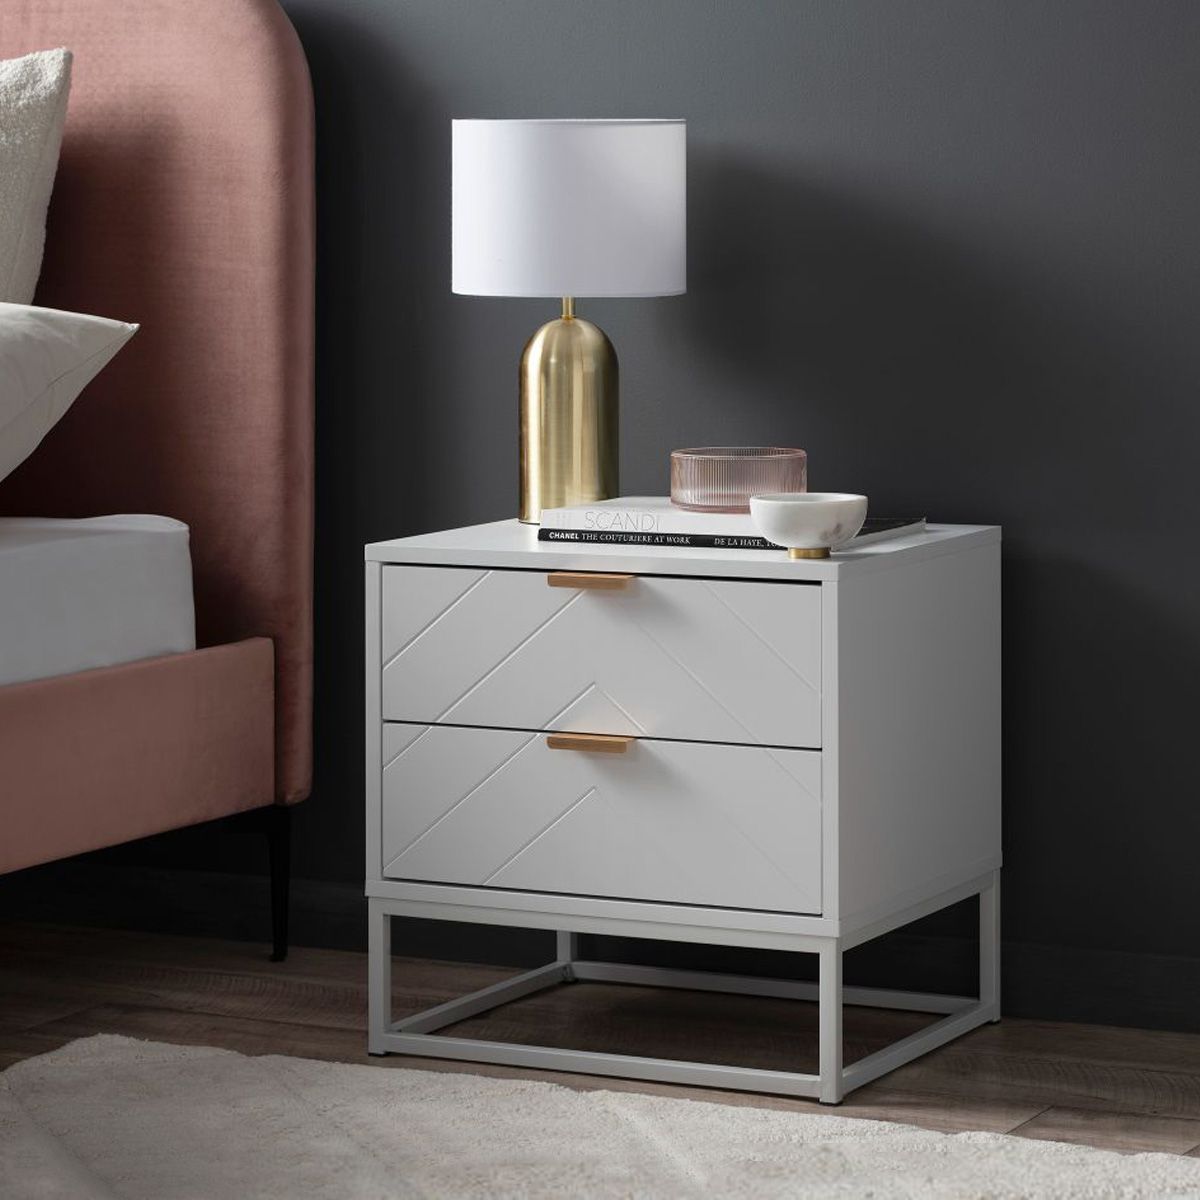 Inca Bedside Table - White